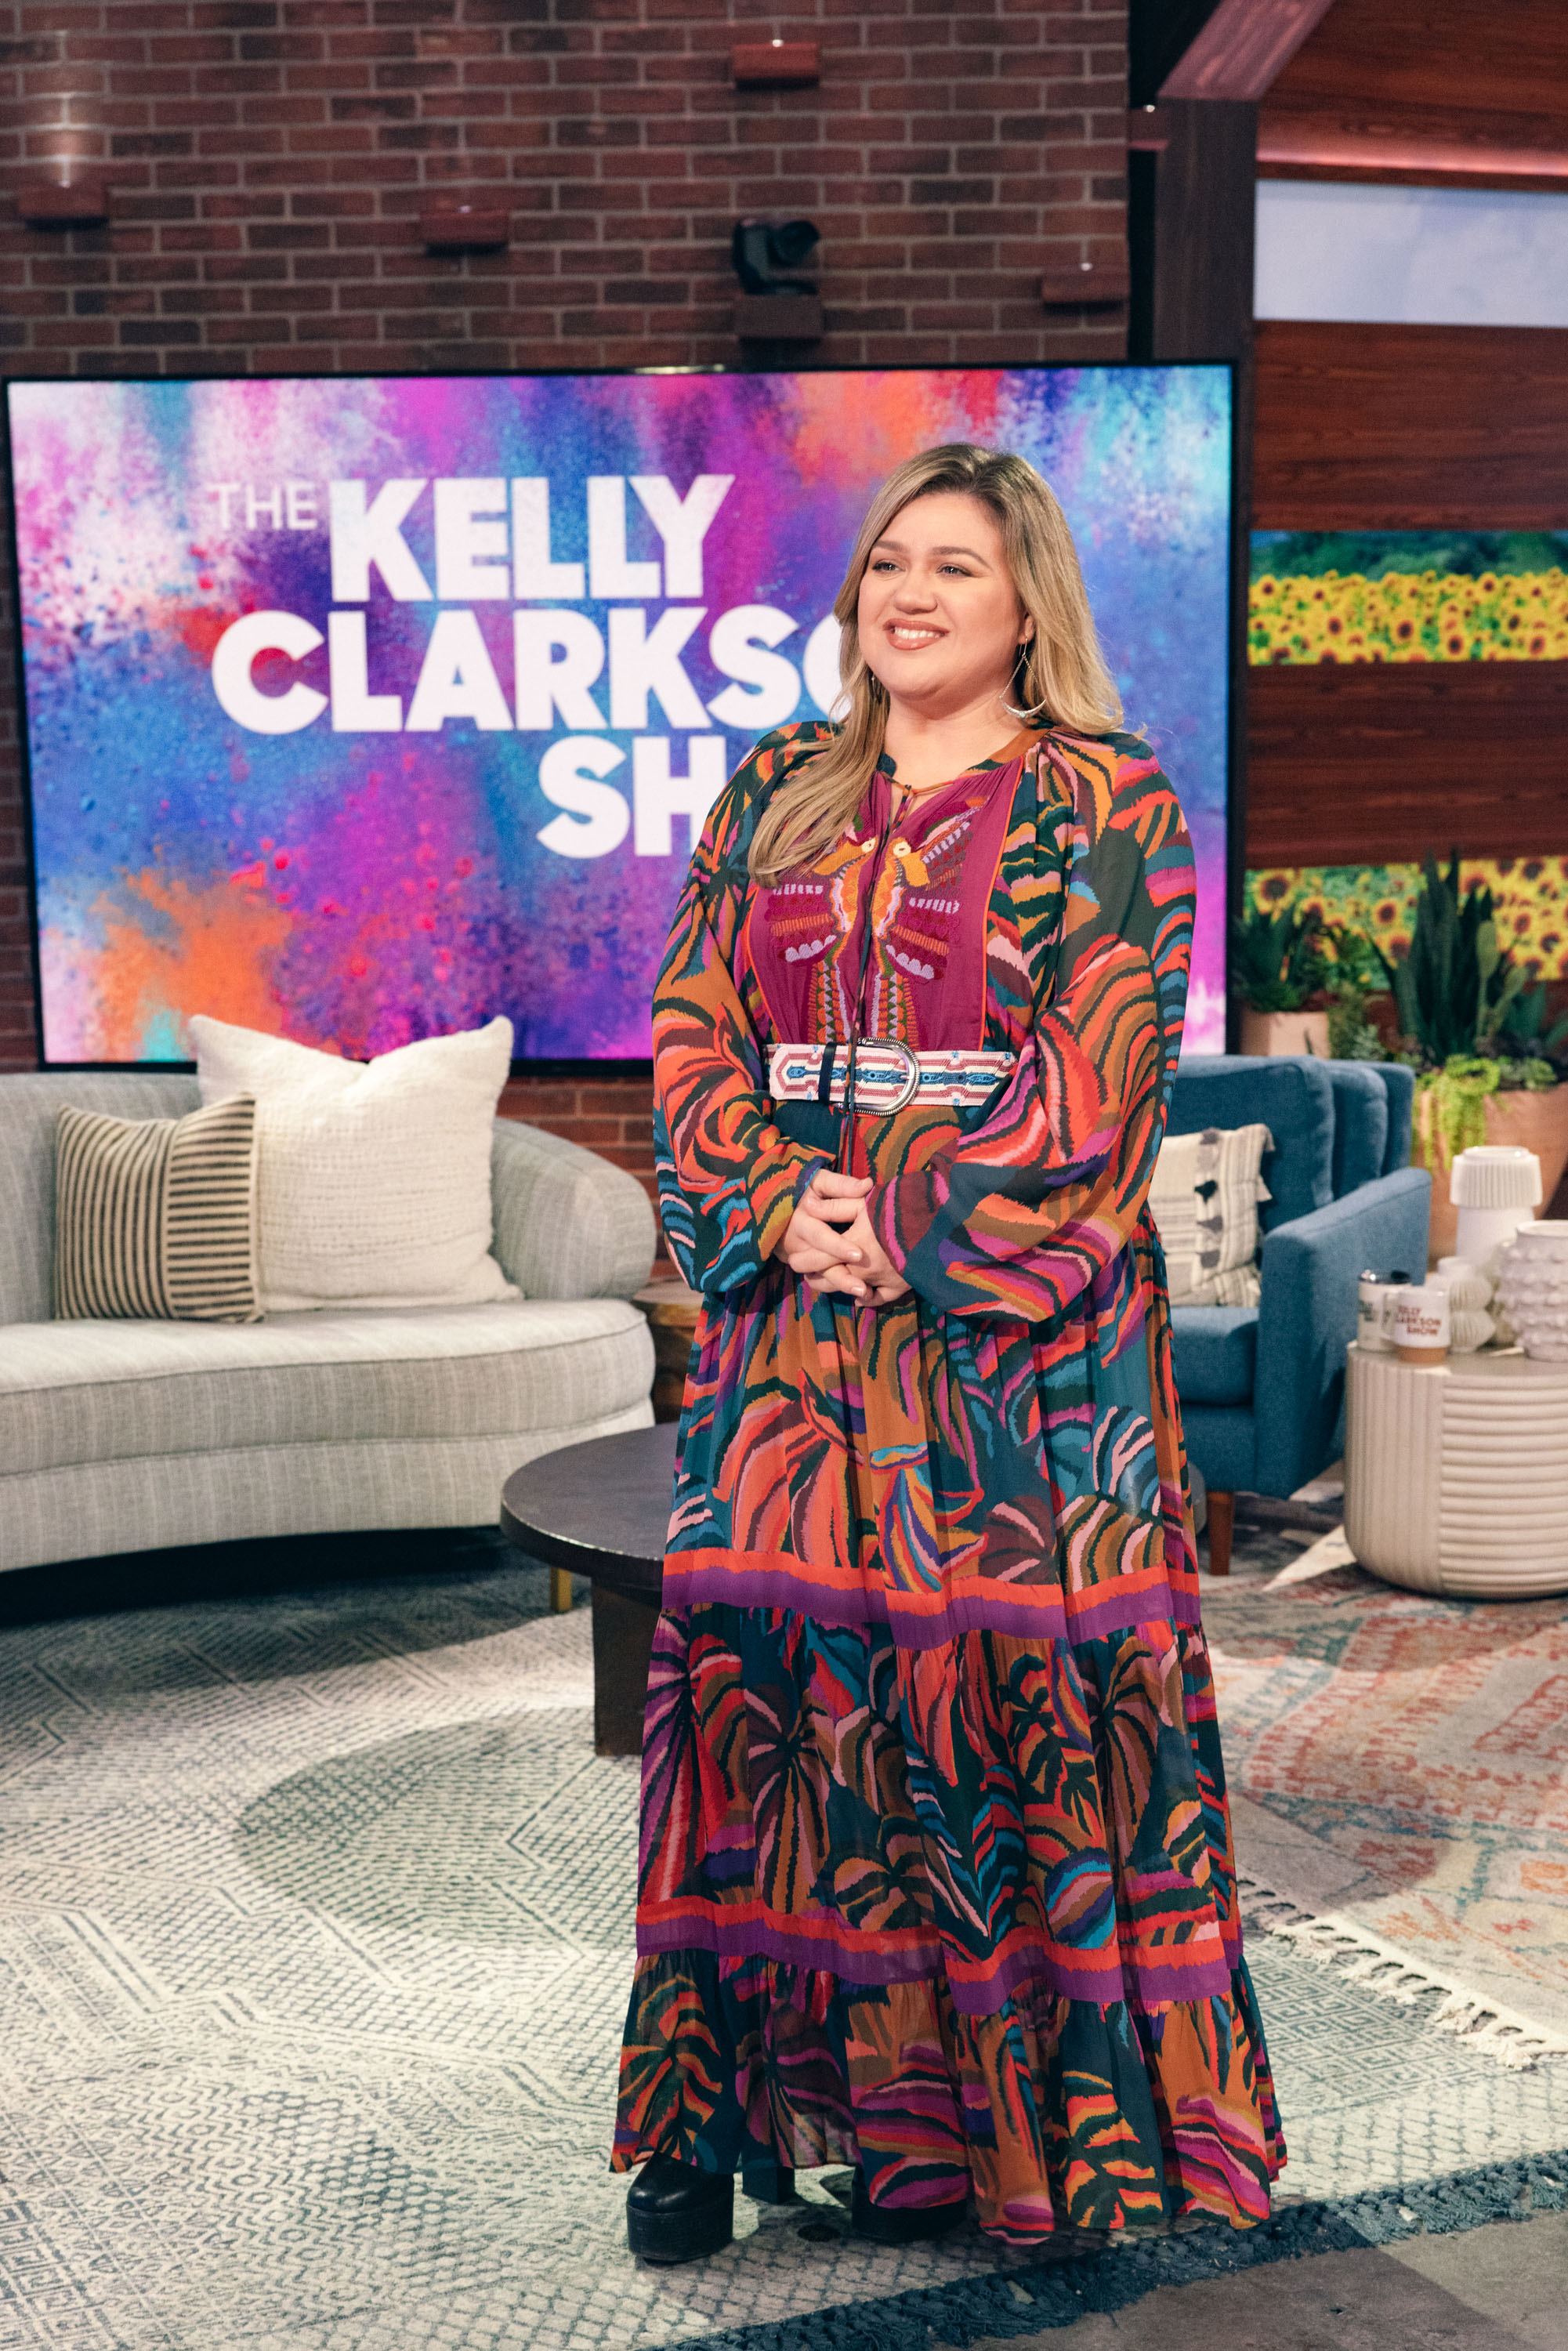 Kelly Clarkson has been focusing on her talk show lately